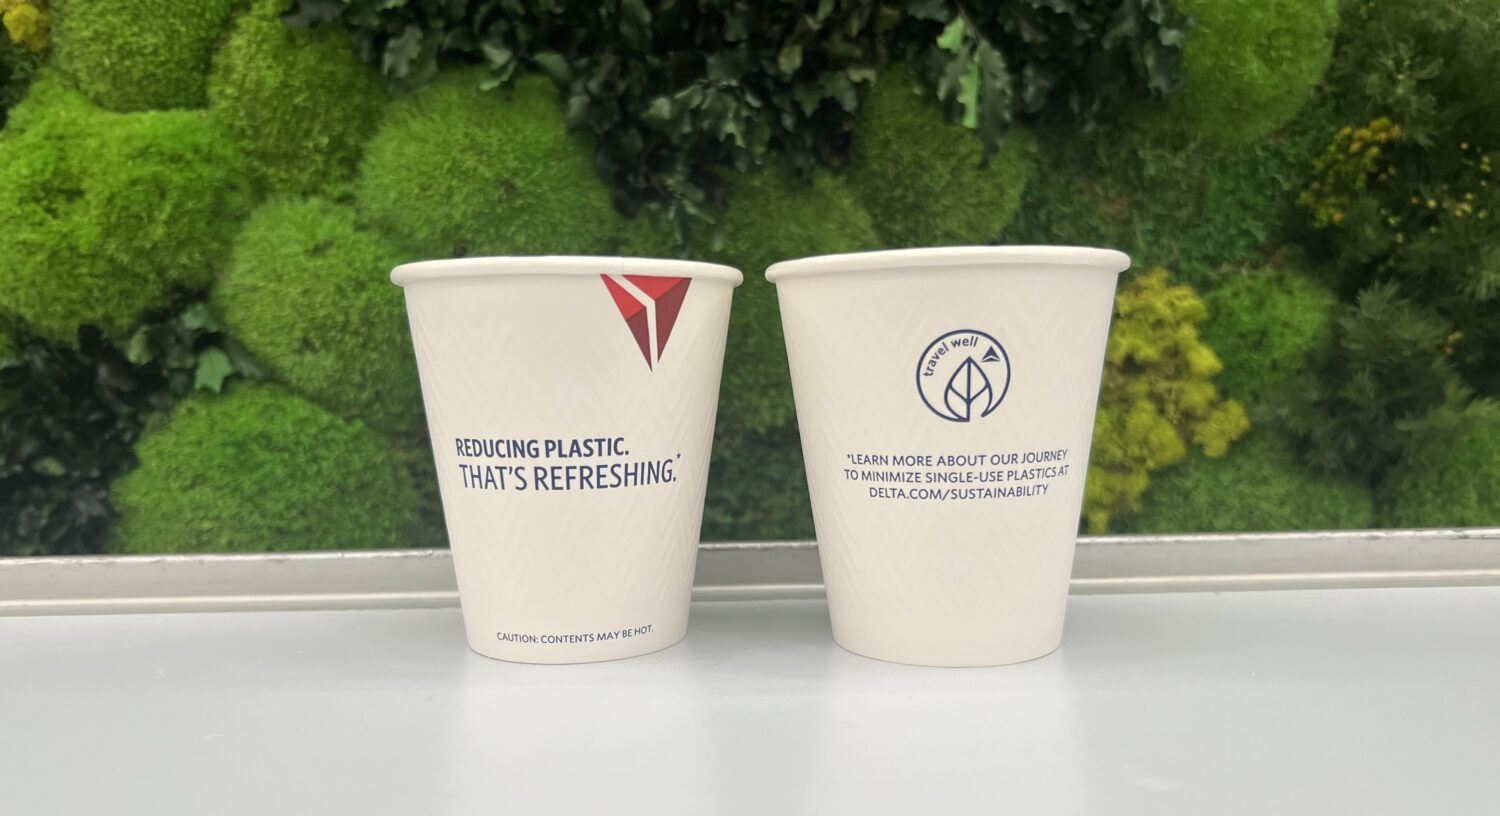 Delta Moves Toward Replacing Plastic Cups for Inflight Drinks